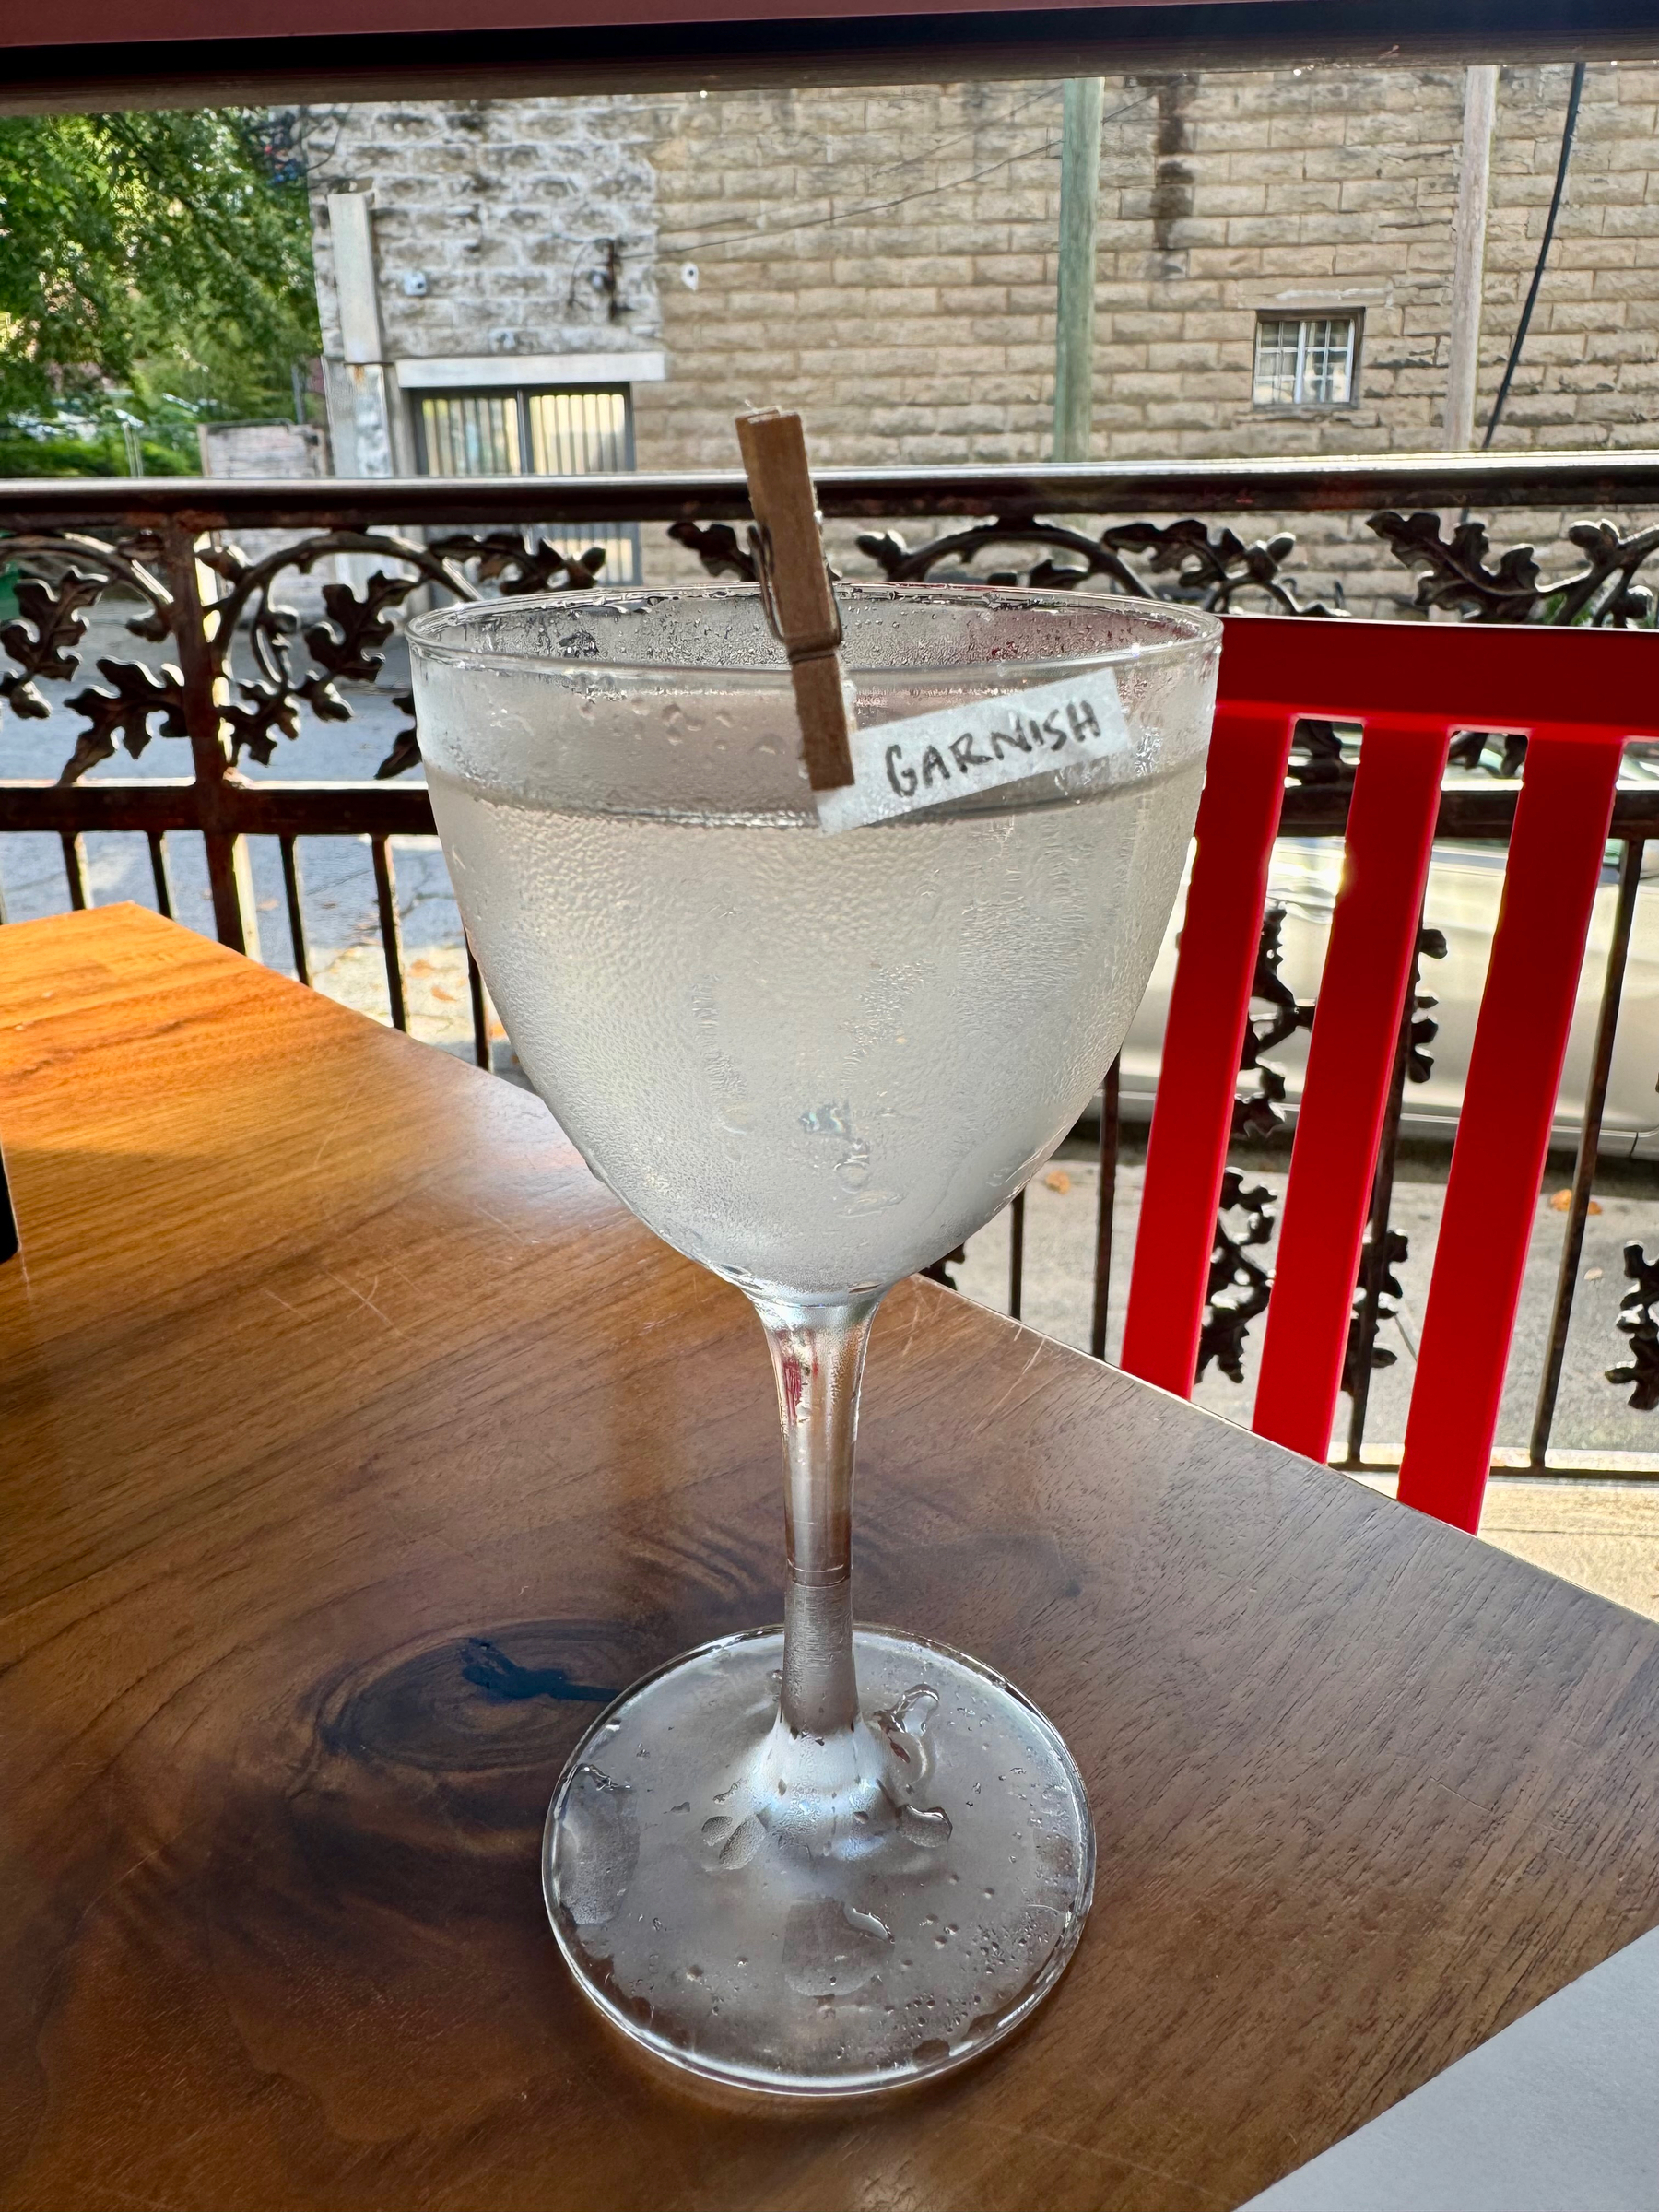 A chilled beverage in a stemmed glass on a wooden table with the word “GARNISH” on a clip attached to the glass. In the background, there’s a balcony with a decorative railing overlooking a street and a stone building.